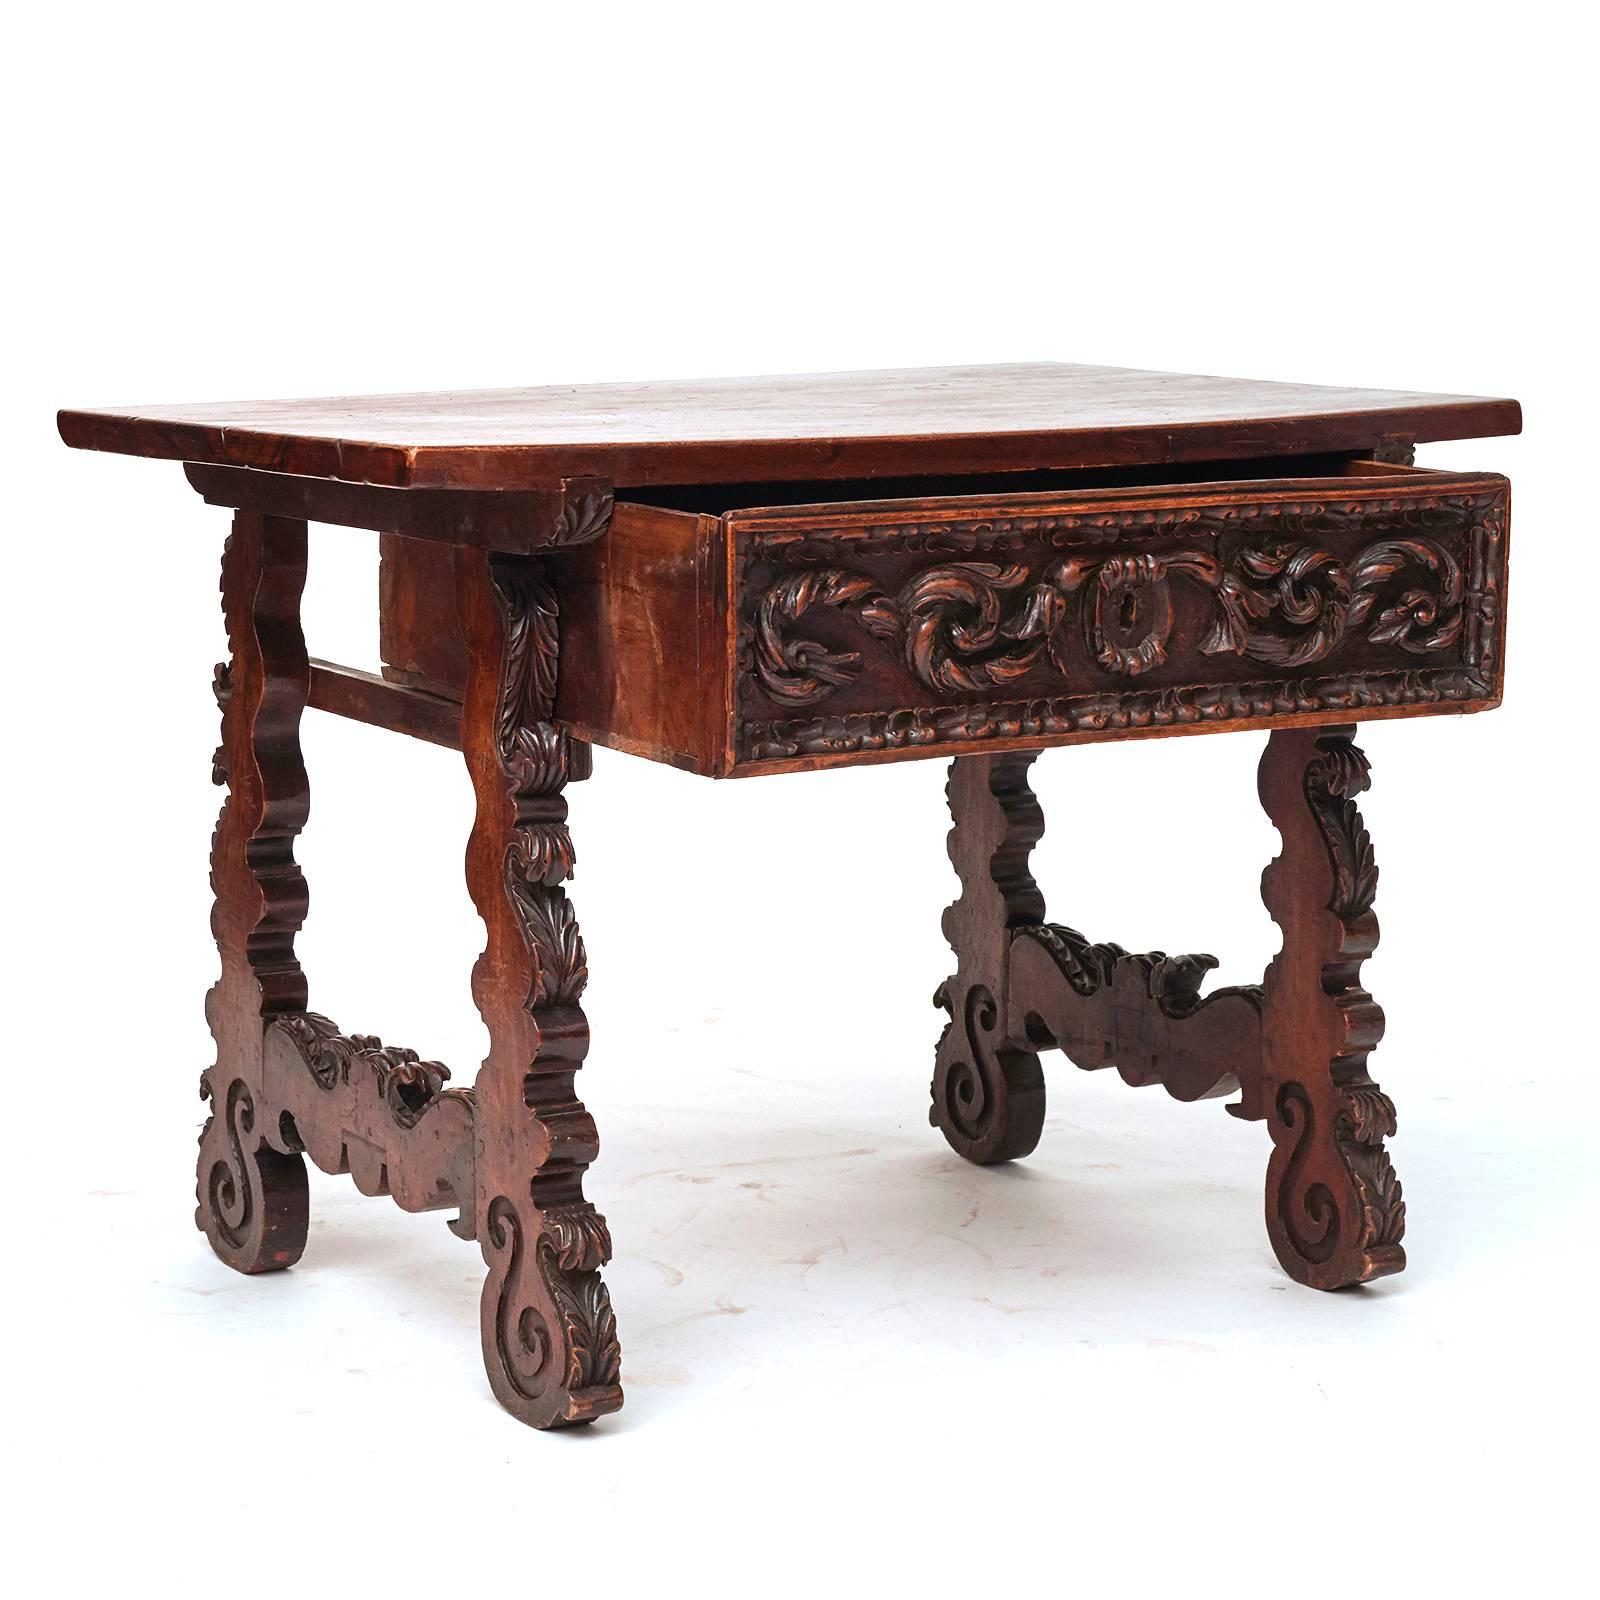 Barok table, chestnut one drawer with carvings, tabeltop one piece of wood, Spain, 1620-1650. Table in original untouched condition,
with beautiful patina.